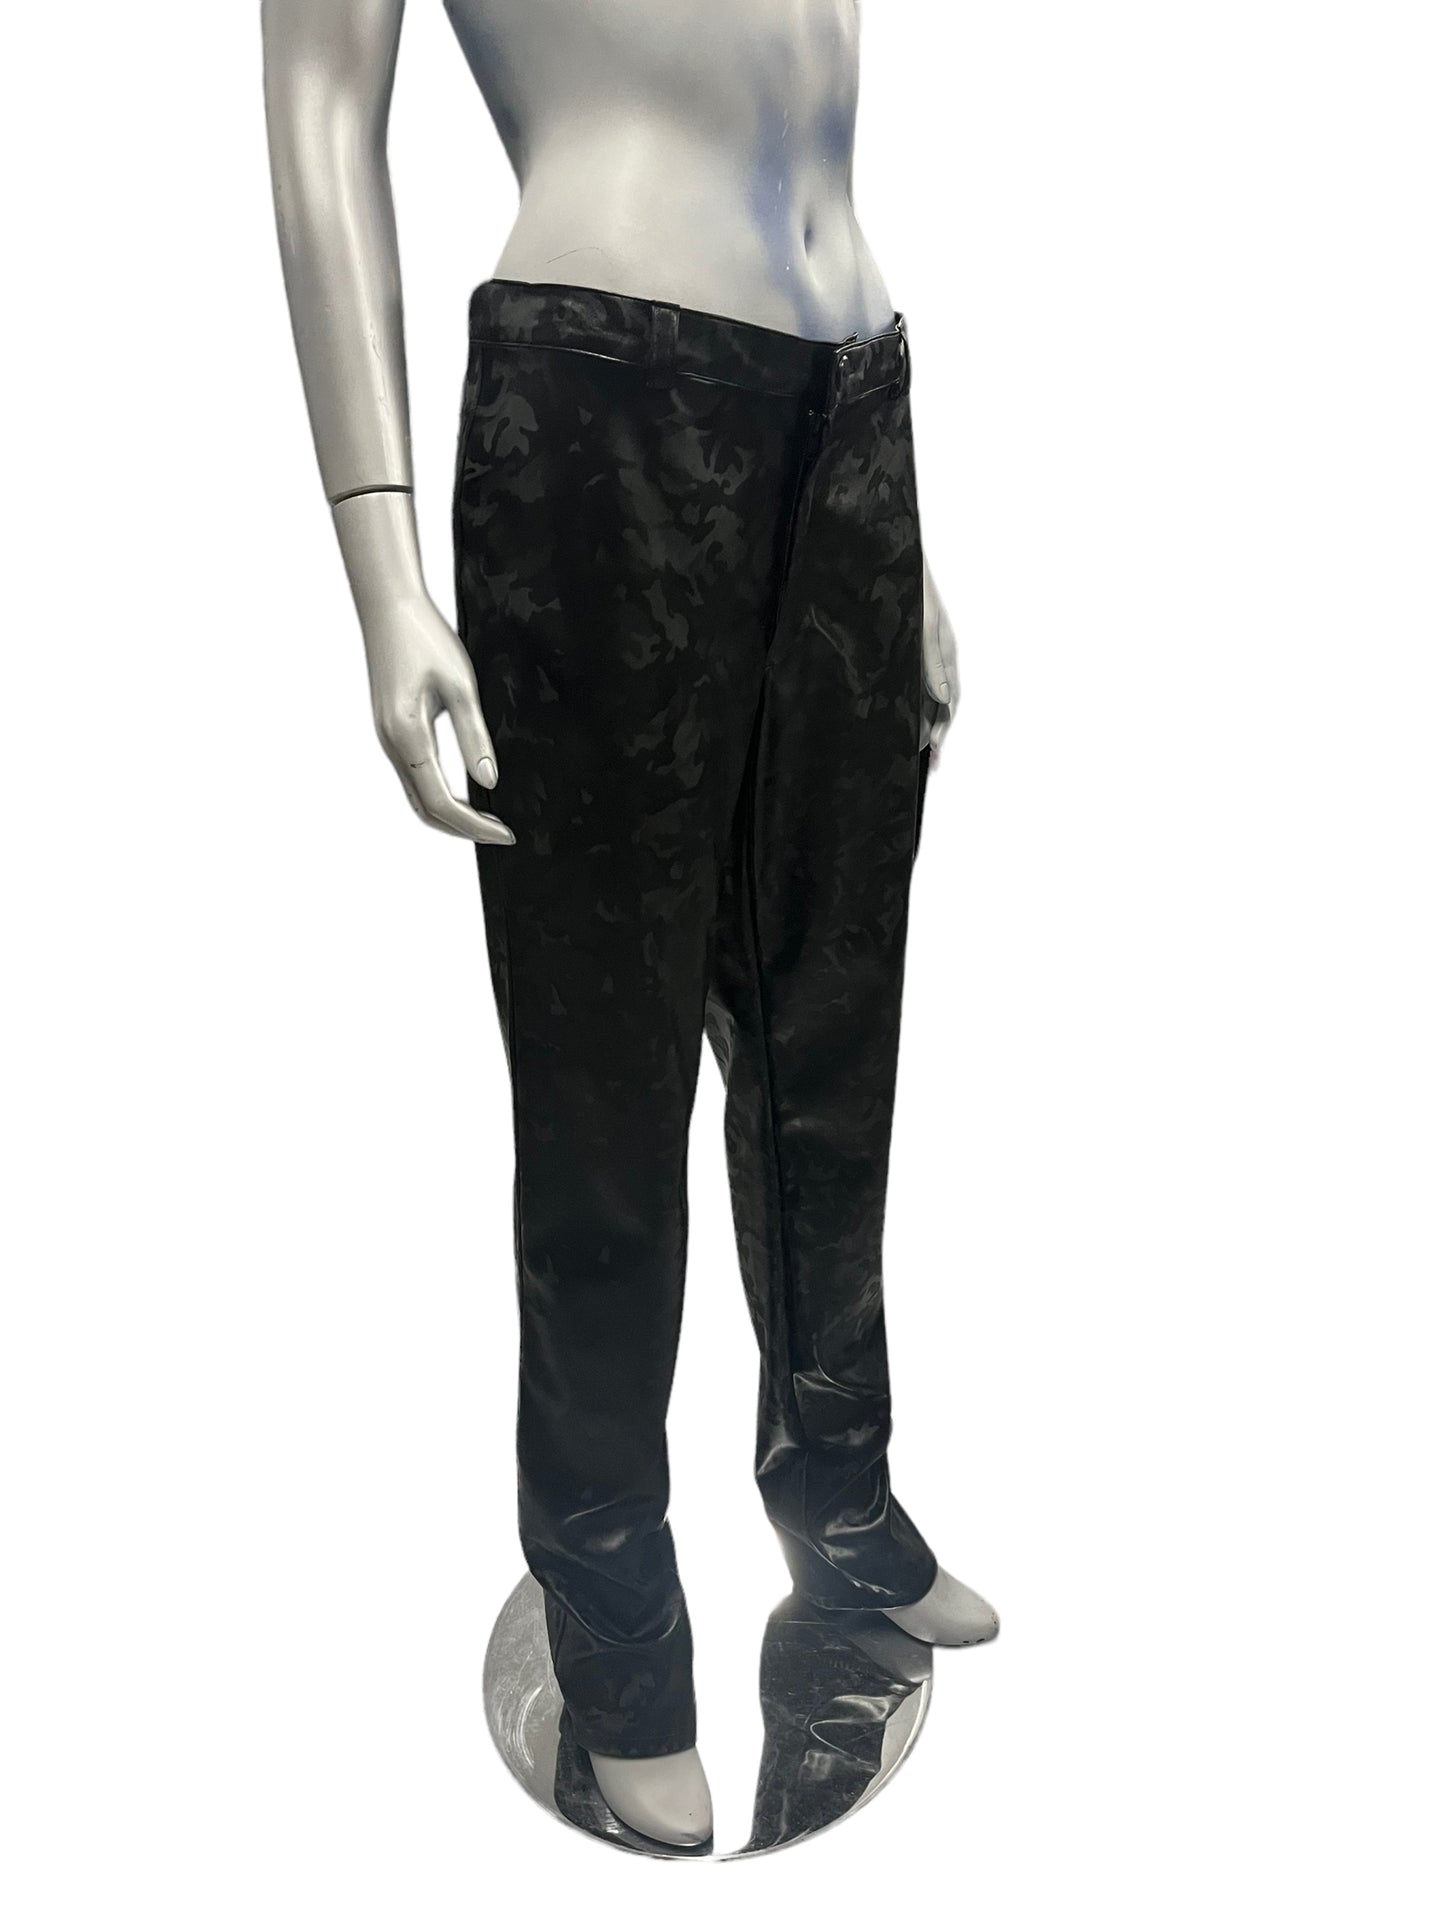 Peter Domenie - LL82 - Black Long Pants With Camouflage Print